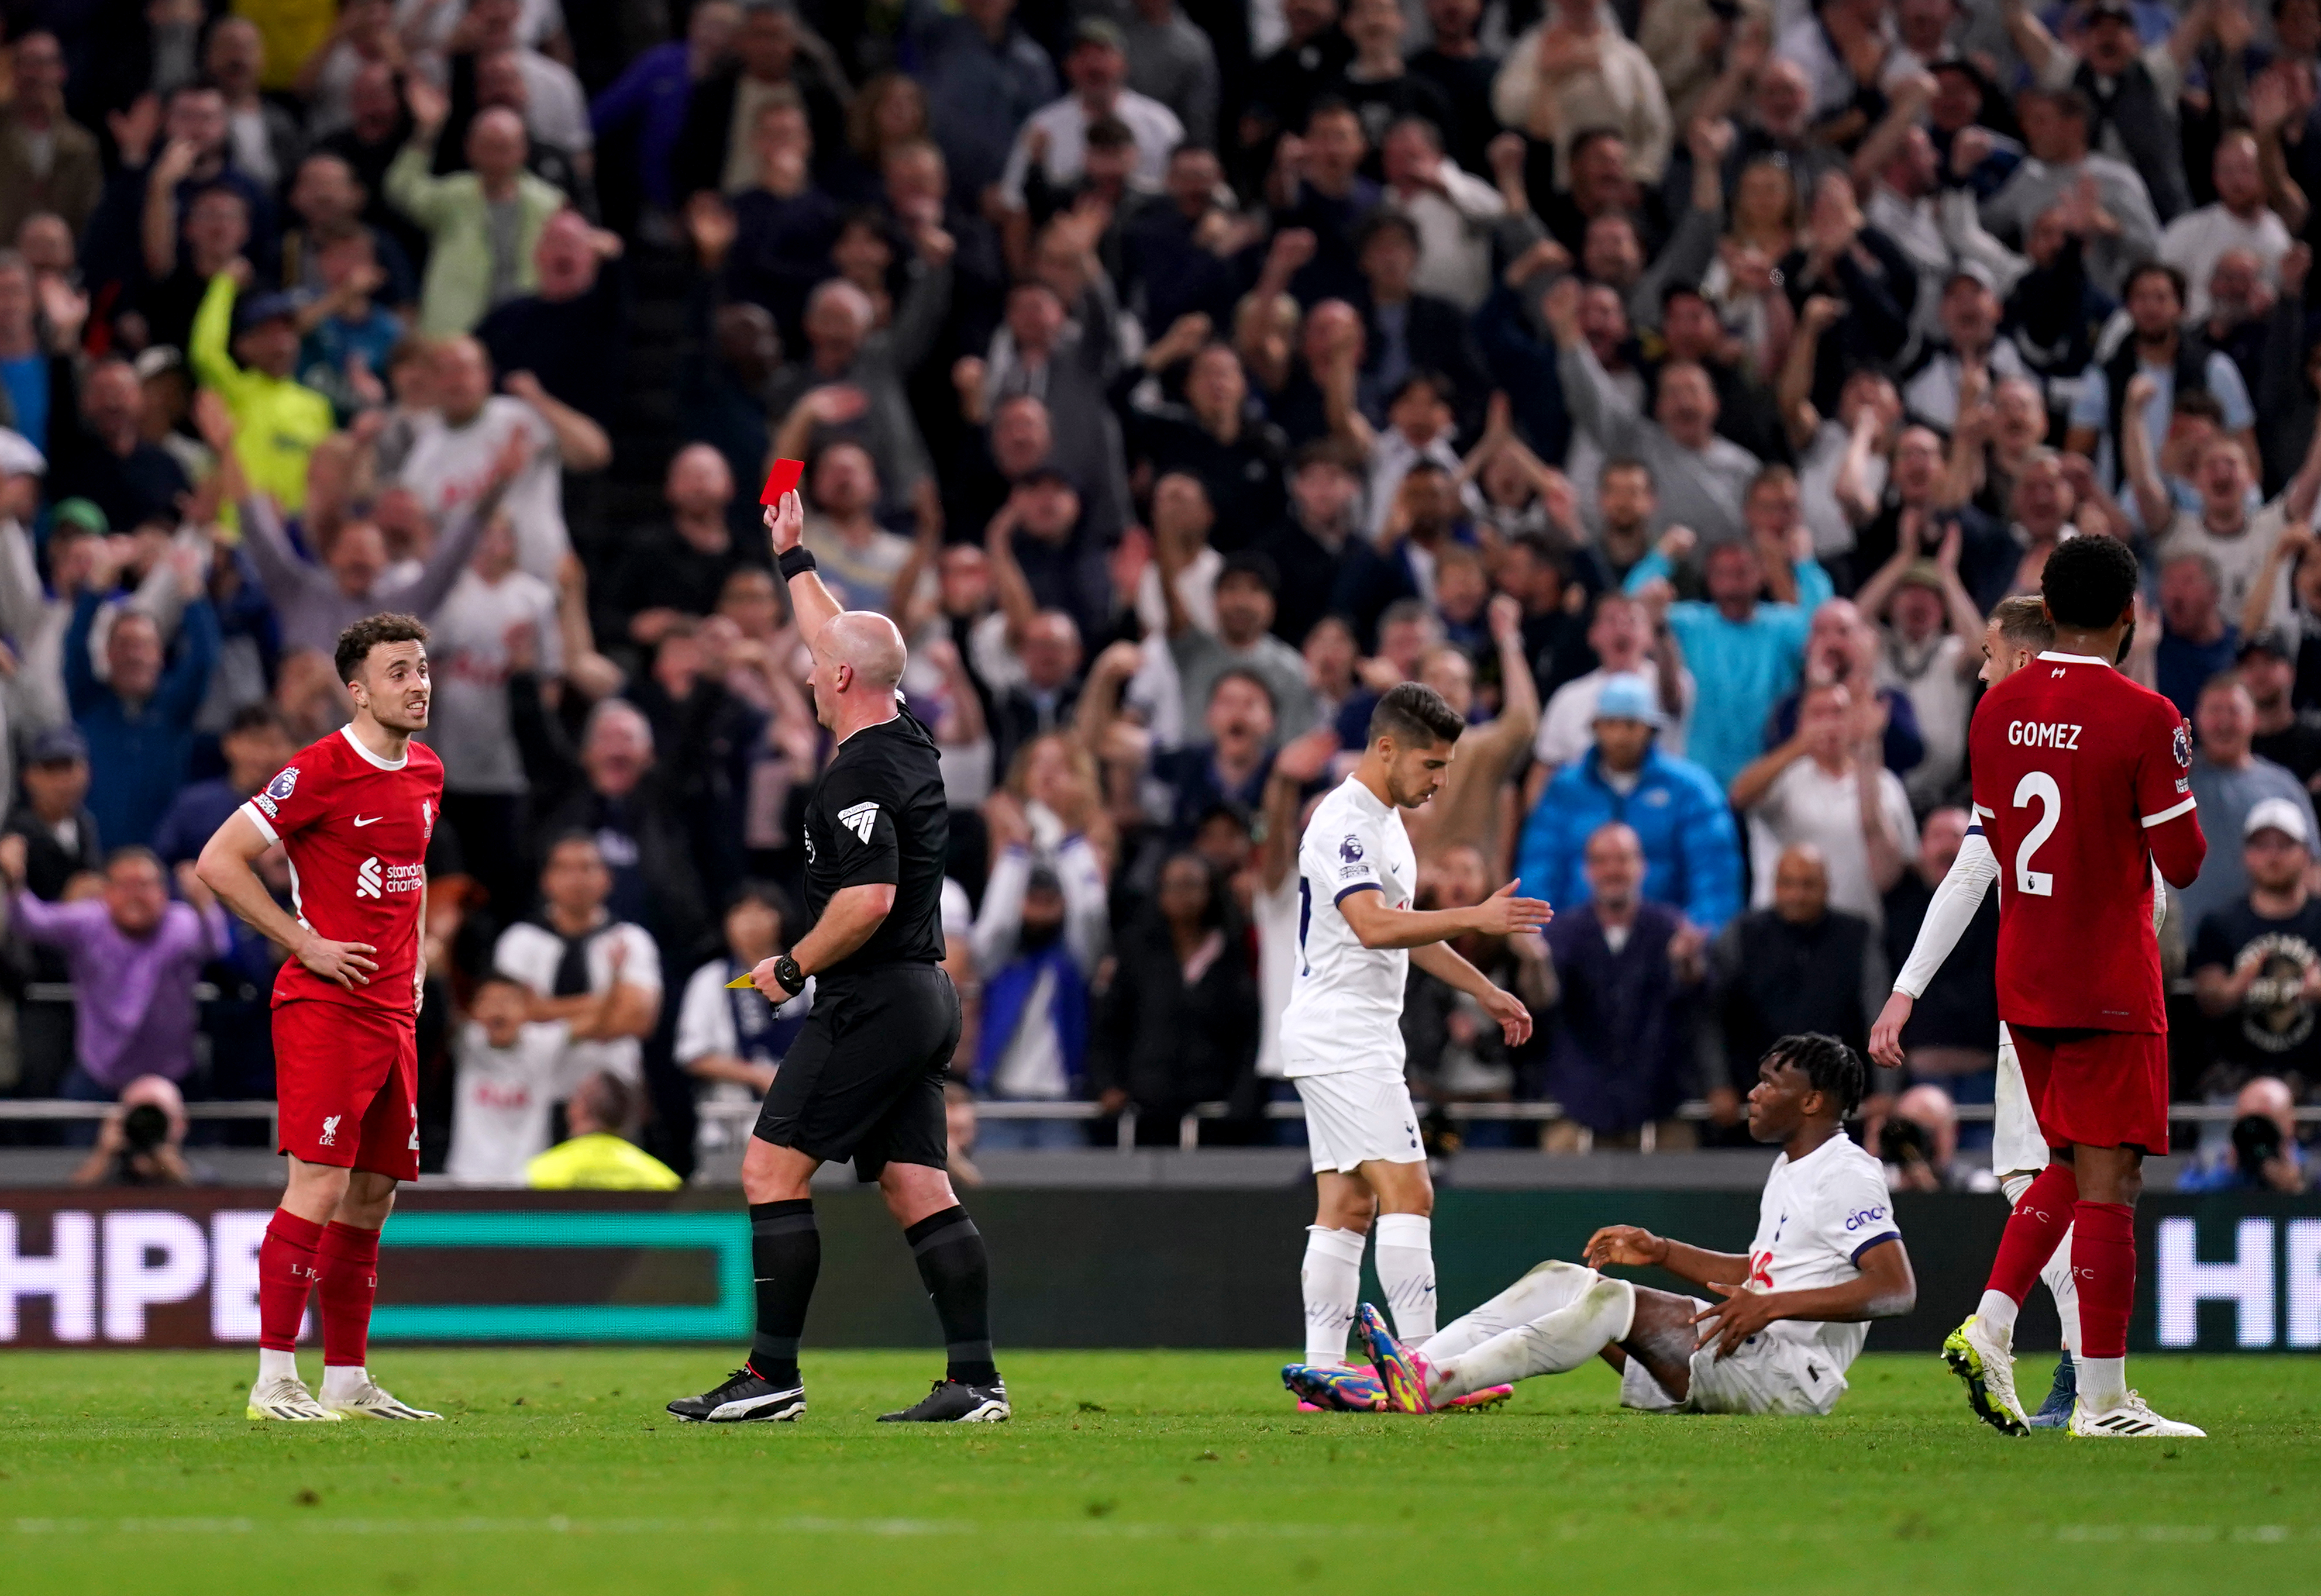 Destiny Udogie was fouled twice within 90 seconds by Diogo Jota - with the Liverpool man booked for both and, therefore, sent off